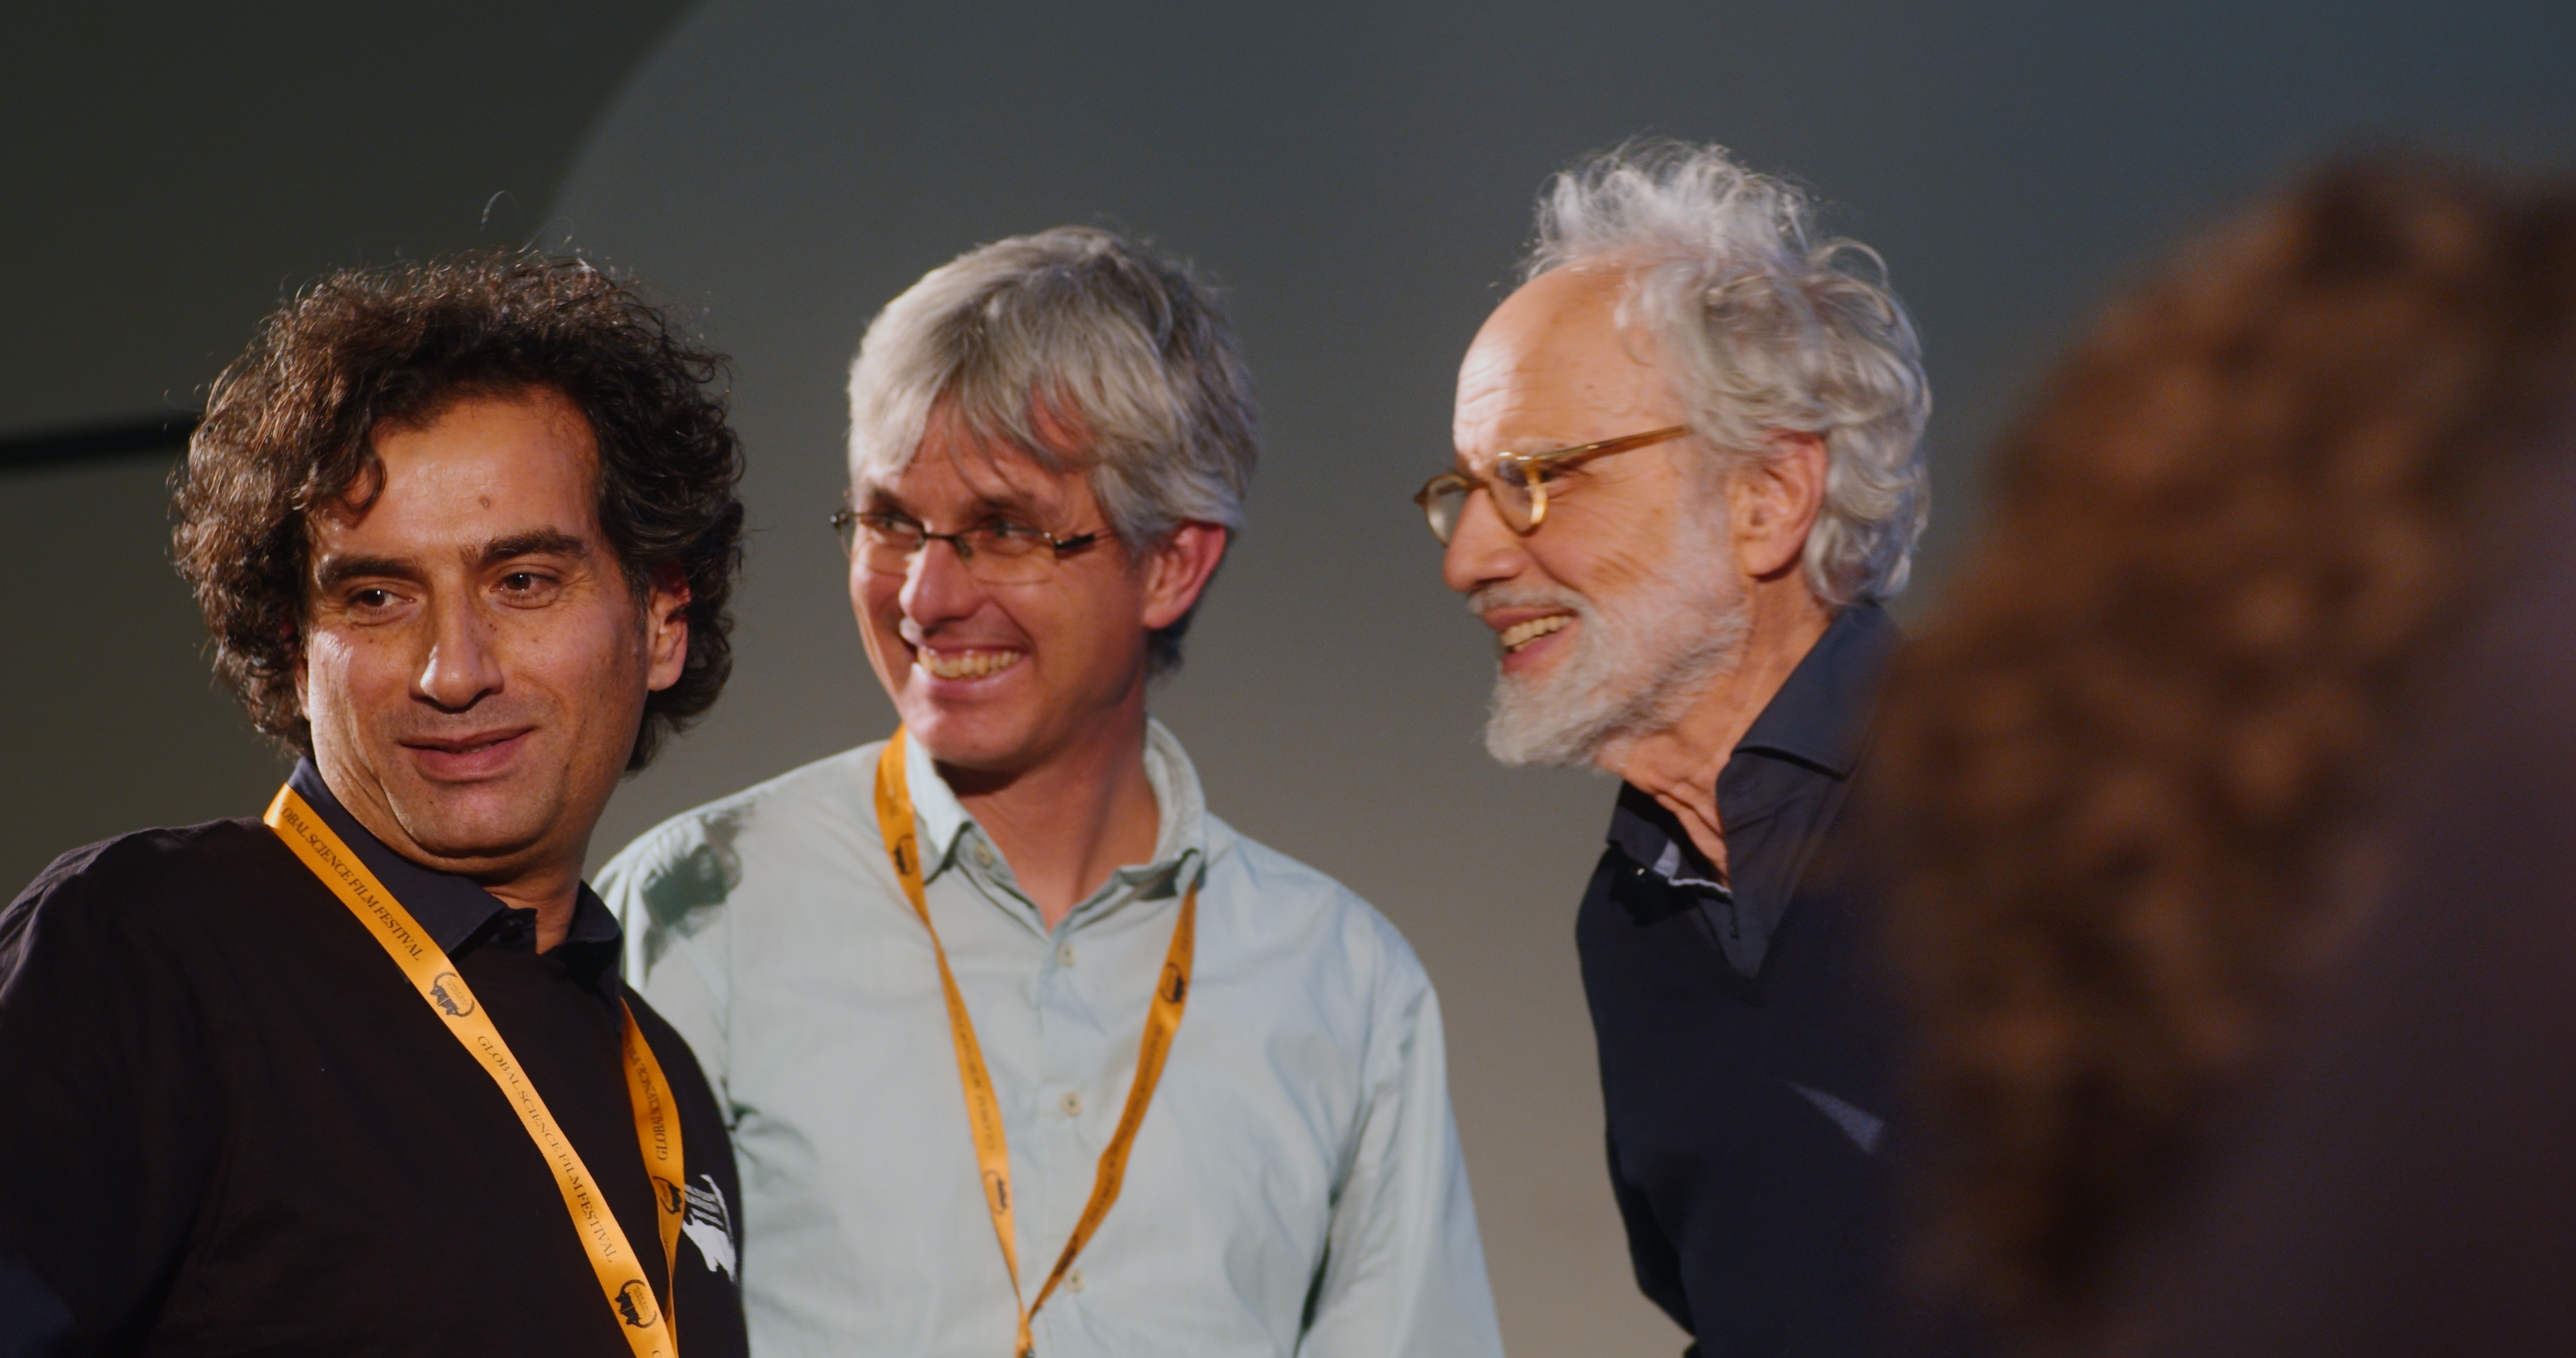 Festival director Samer Angelone (left) with renowned Swiss documentary filmmaker Markus Imhoof (right). Markus presented his film on migration and also acted as head of the prize jury at the festival. Photo: Halil Kesselring